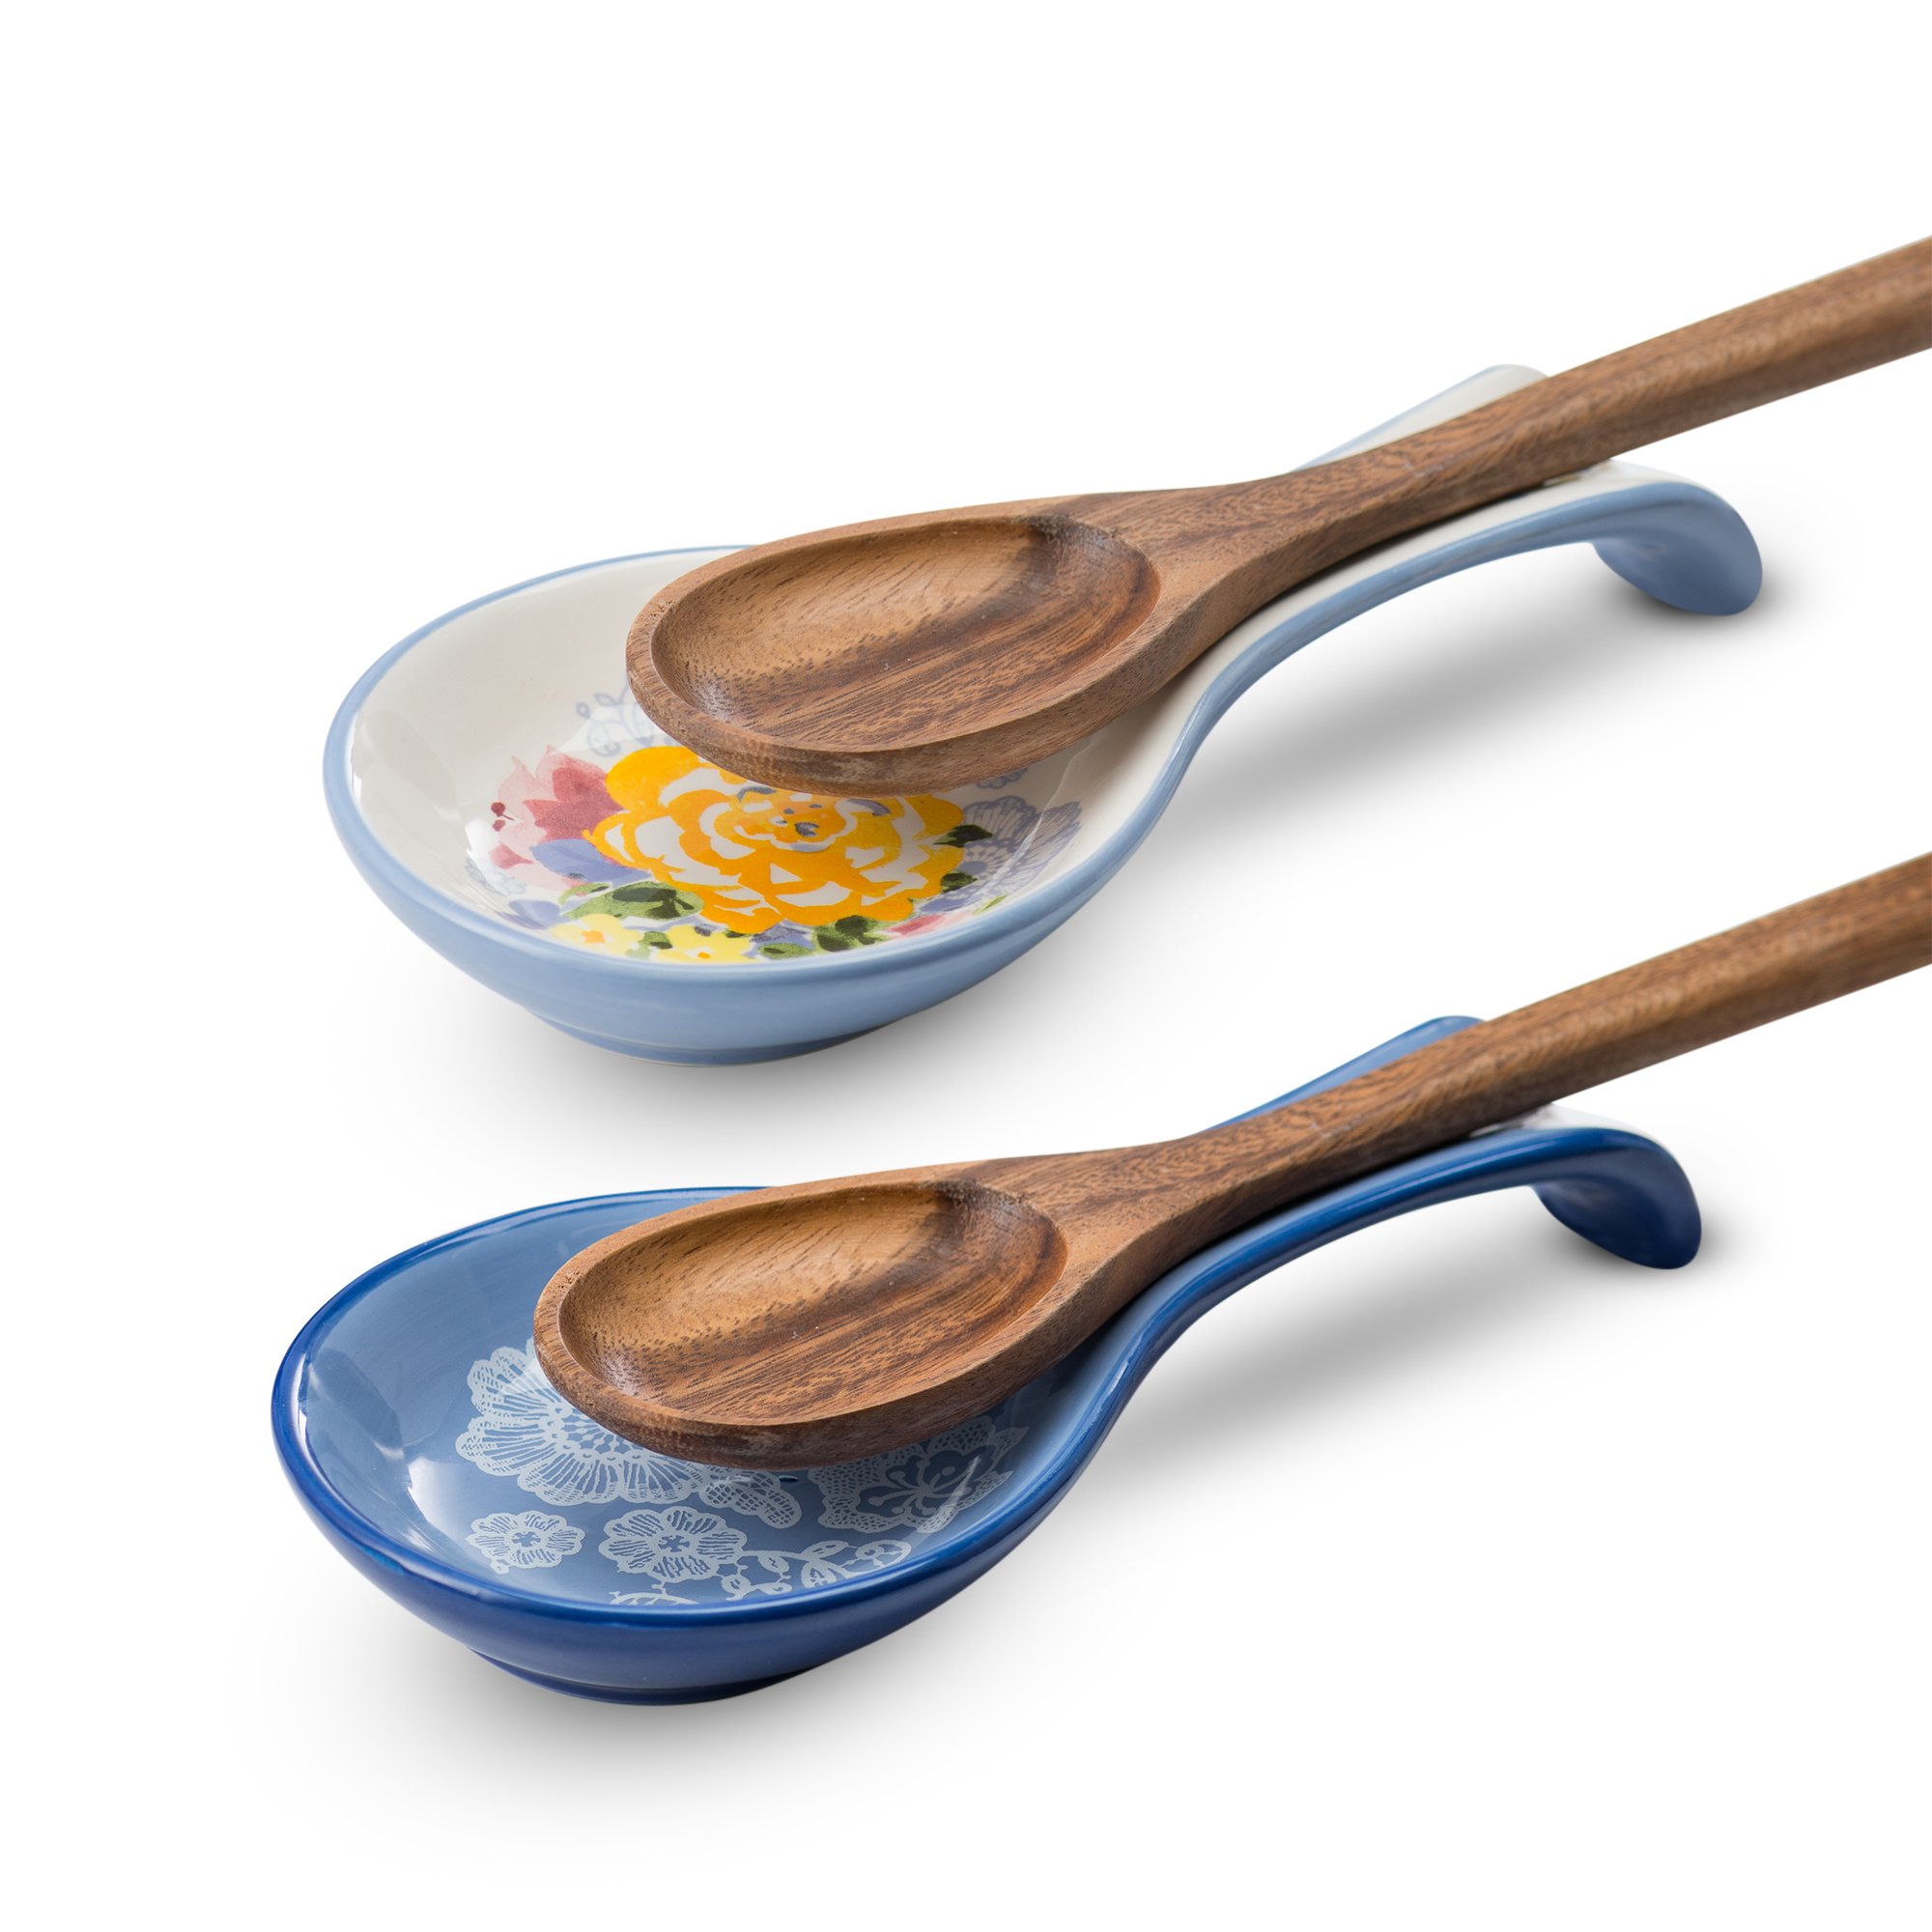 Spoon Rest, Ceramic Make, by Kook Spatula, Ladle, Utensil Holder, Dishwasher Safe for Stove Top, for Home and Coffee Bar Accessories, Set of 2 (Floral)